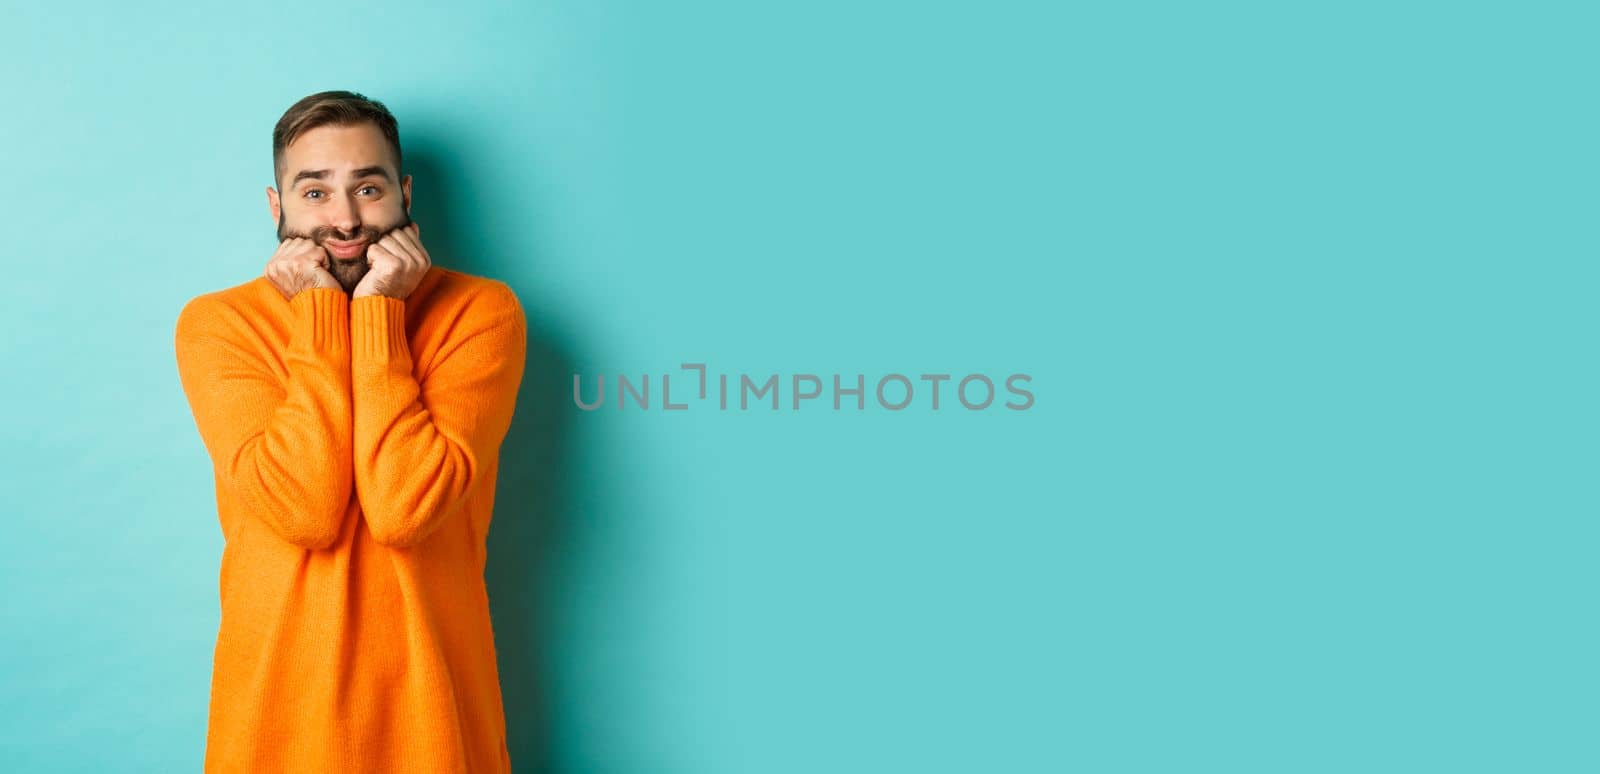 Sad man sighing and looking thoughtful, standing in orange sweater against turquoise background.